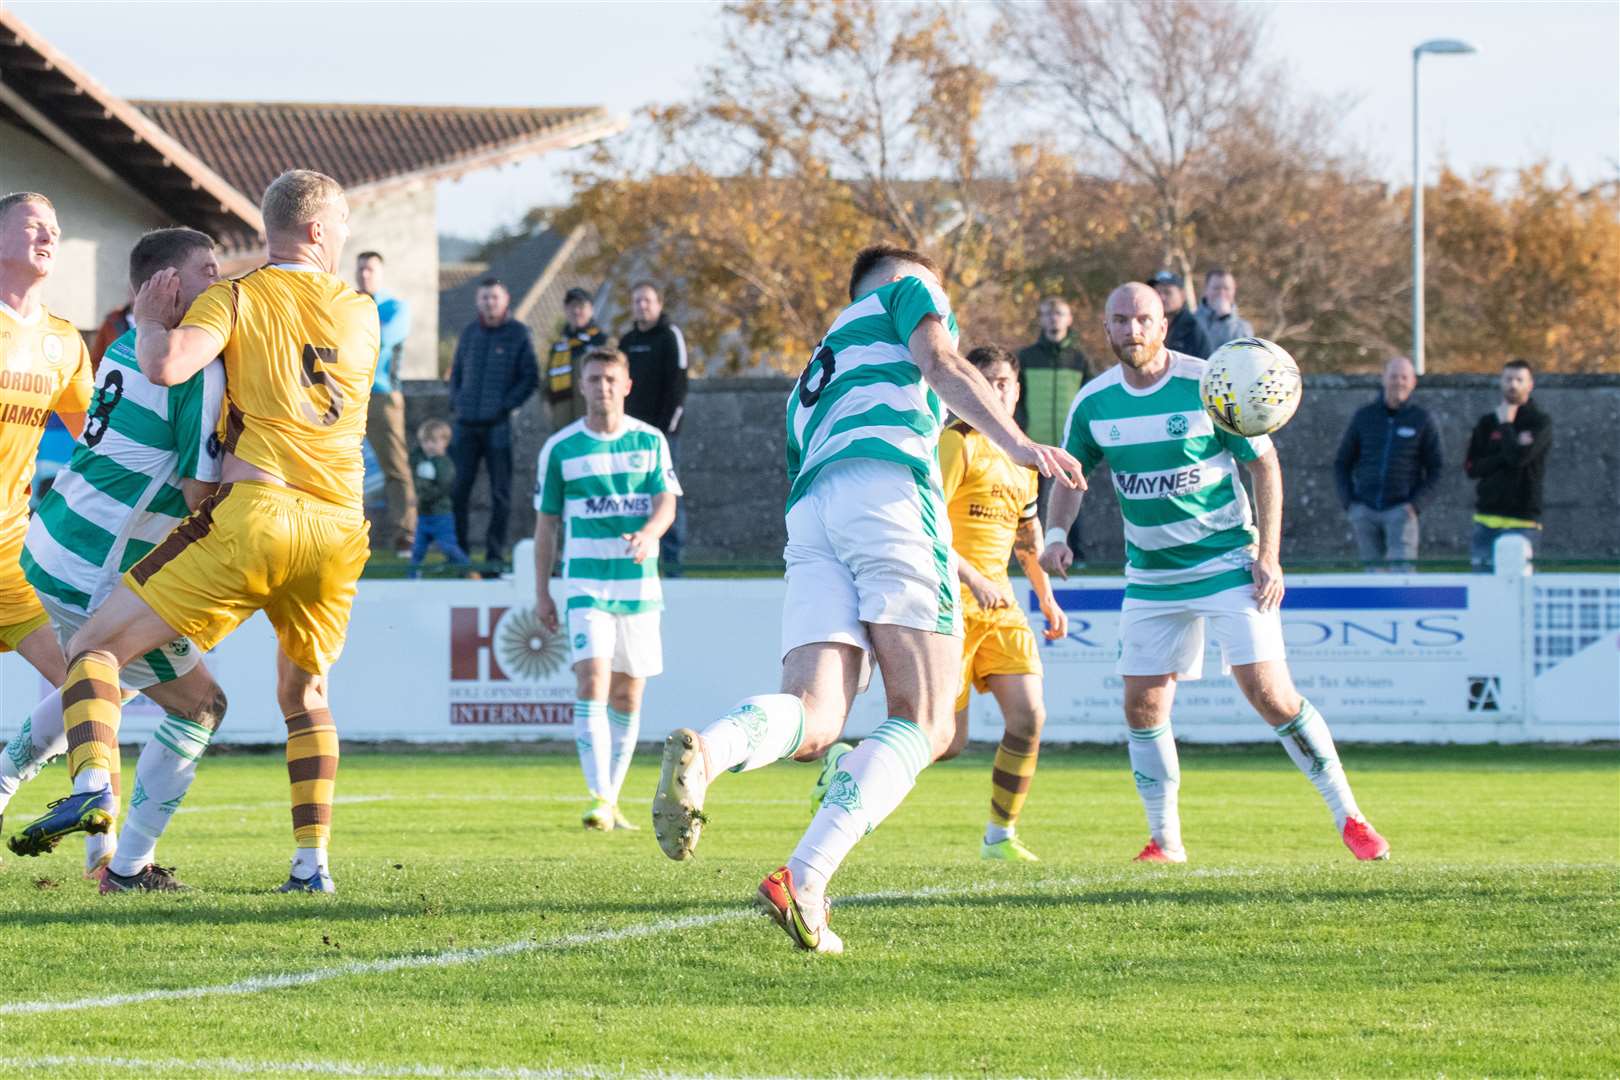 Buckie Thistle's Jack Murray heads home the opening goal for the Jags. ..Buckie Thistle FC (2) vs Forres Mechanics FC (0) - Highland Football League 22/23 - Victoria Park, Buckie 29/10/2022...Picture: Daniel Forsyth..